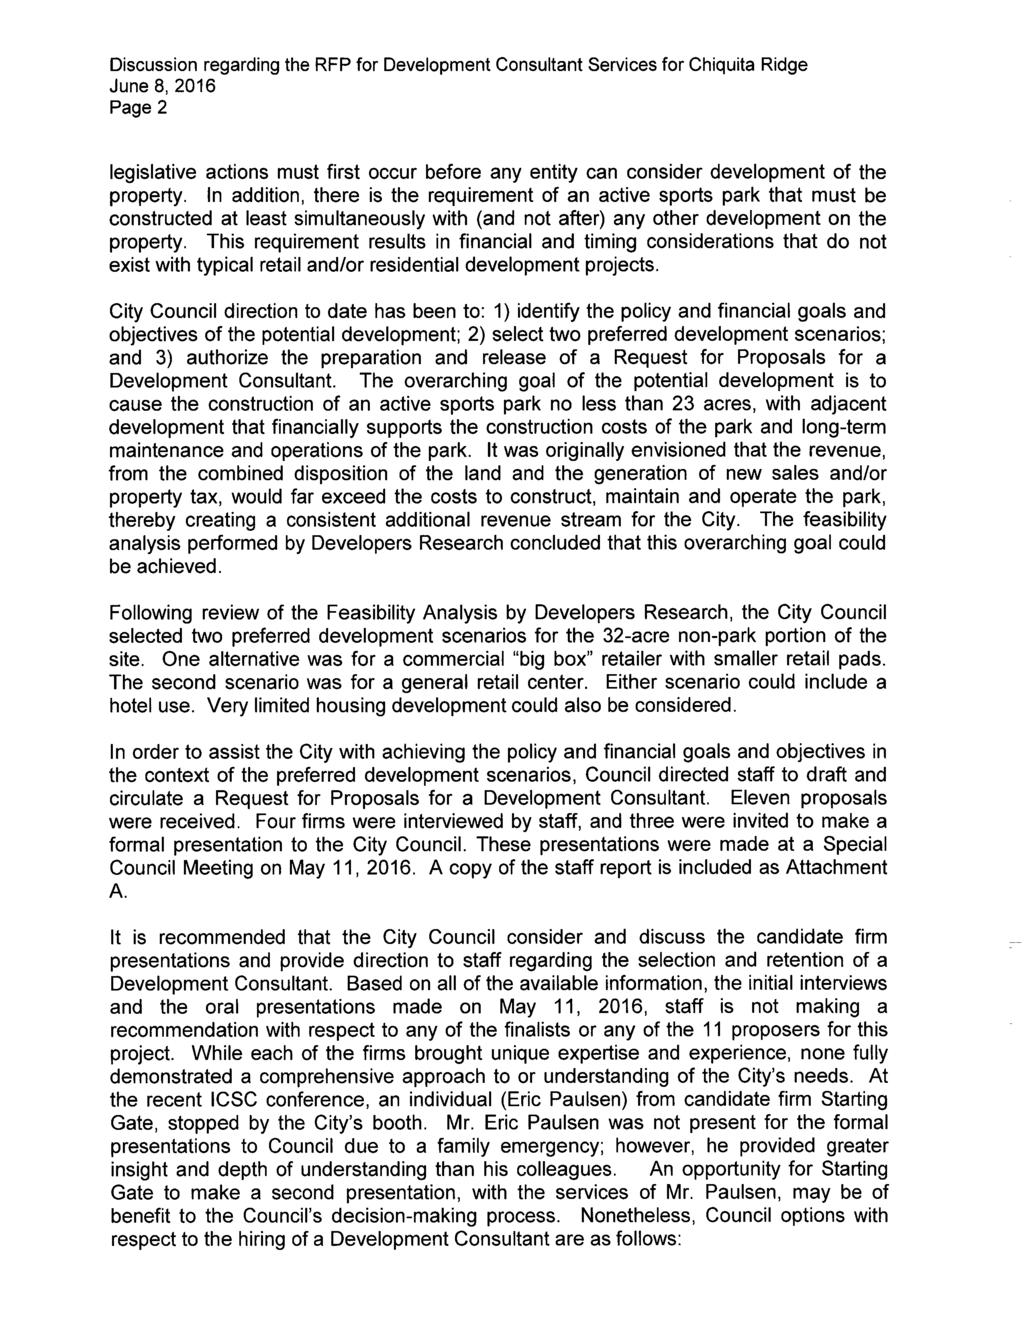 Discussion regarding the RFP for Development Consultant Services for Chiquita Ridge June 8, 2016 Page 2 Page 2 legislative actions must first occur before any entity can consider development of the